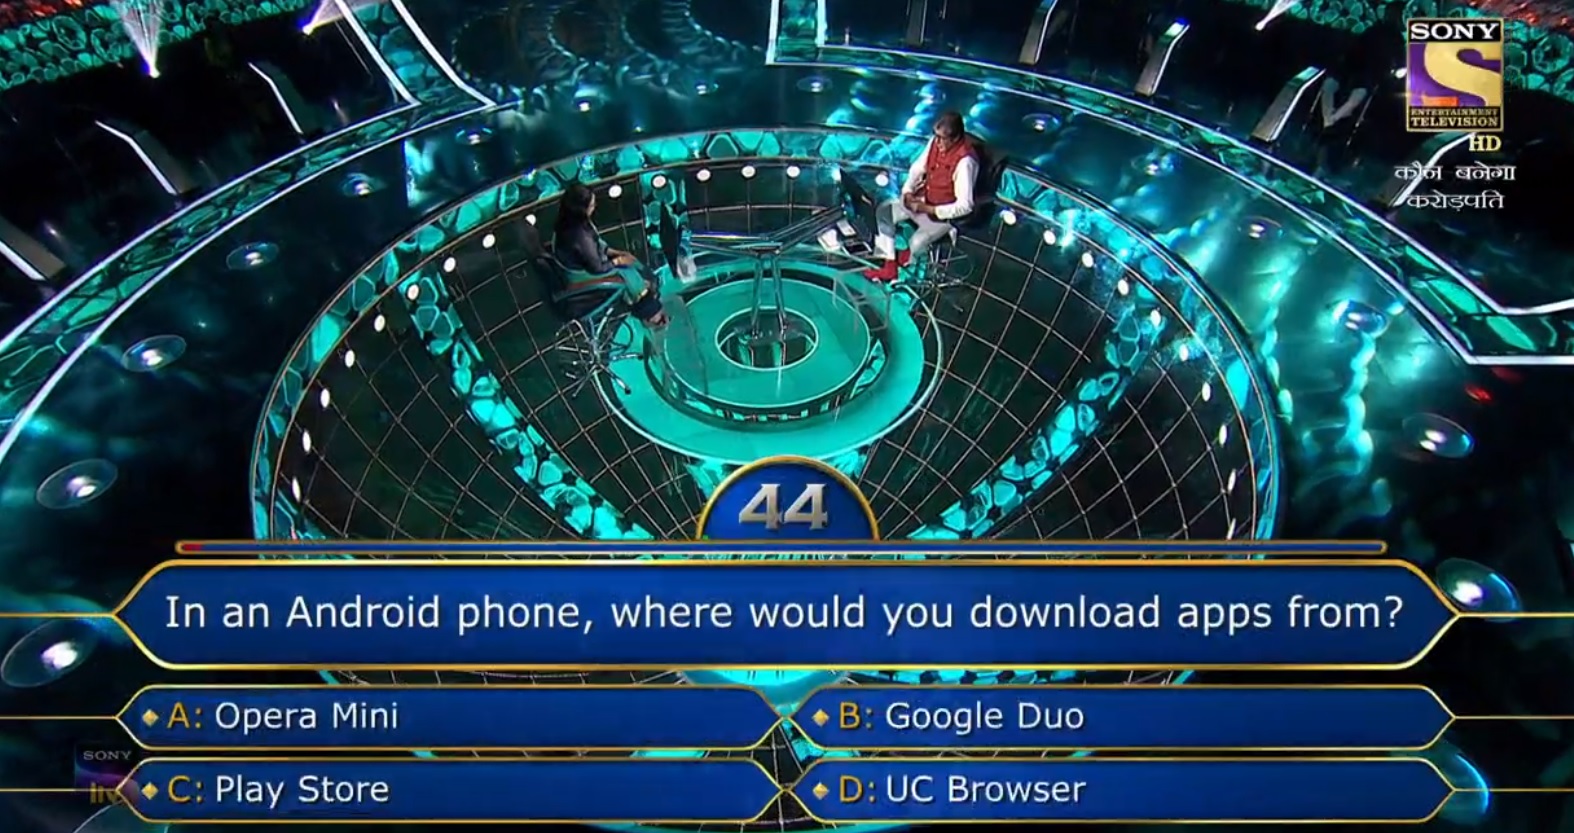 Ques : In an Android phone, where would you download apps from?